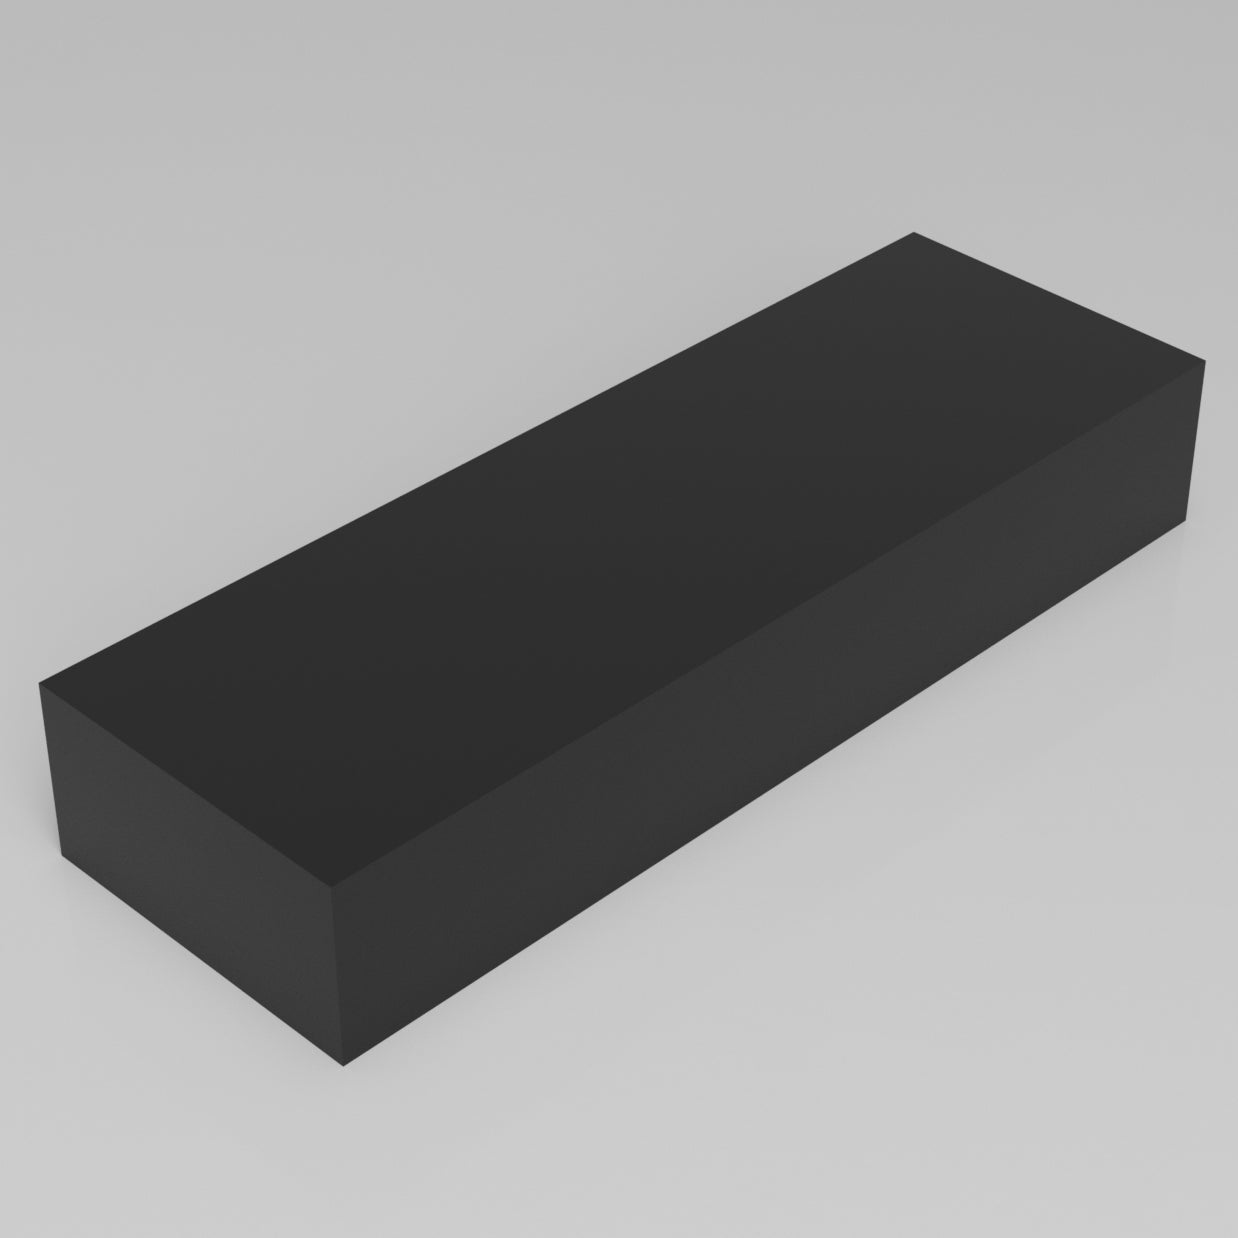 Machinable Wax Rectangular Block Front View 4 Inch by 8 Inch by 24 Inch